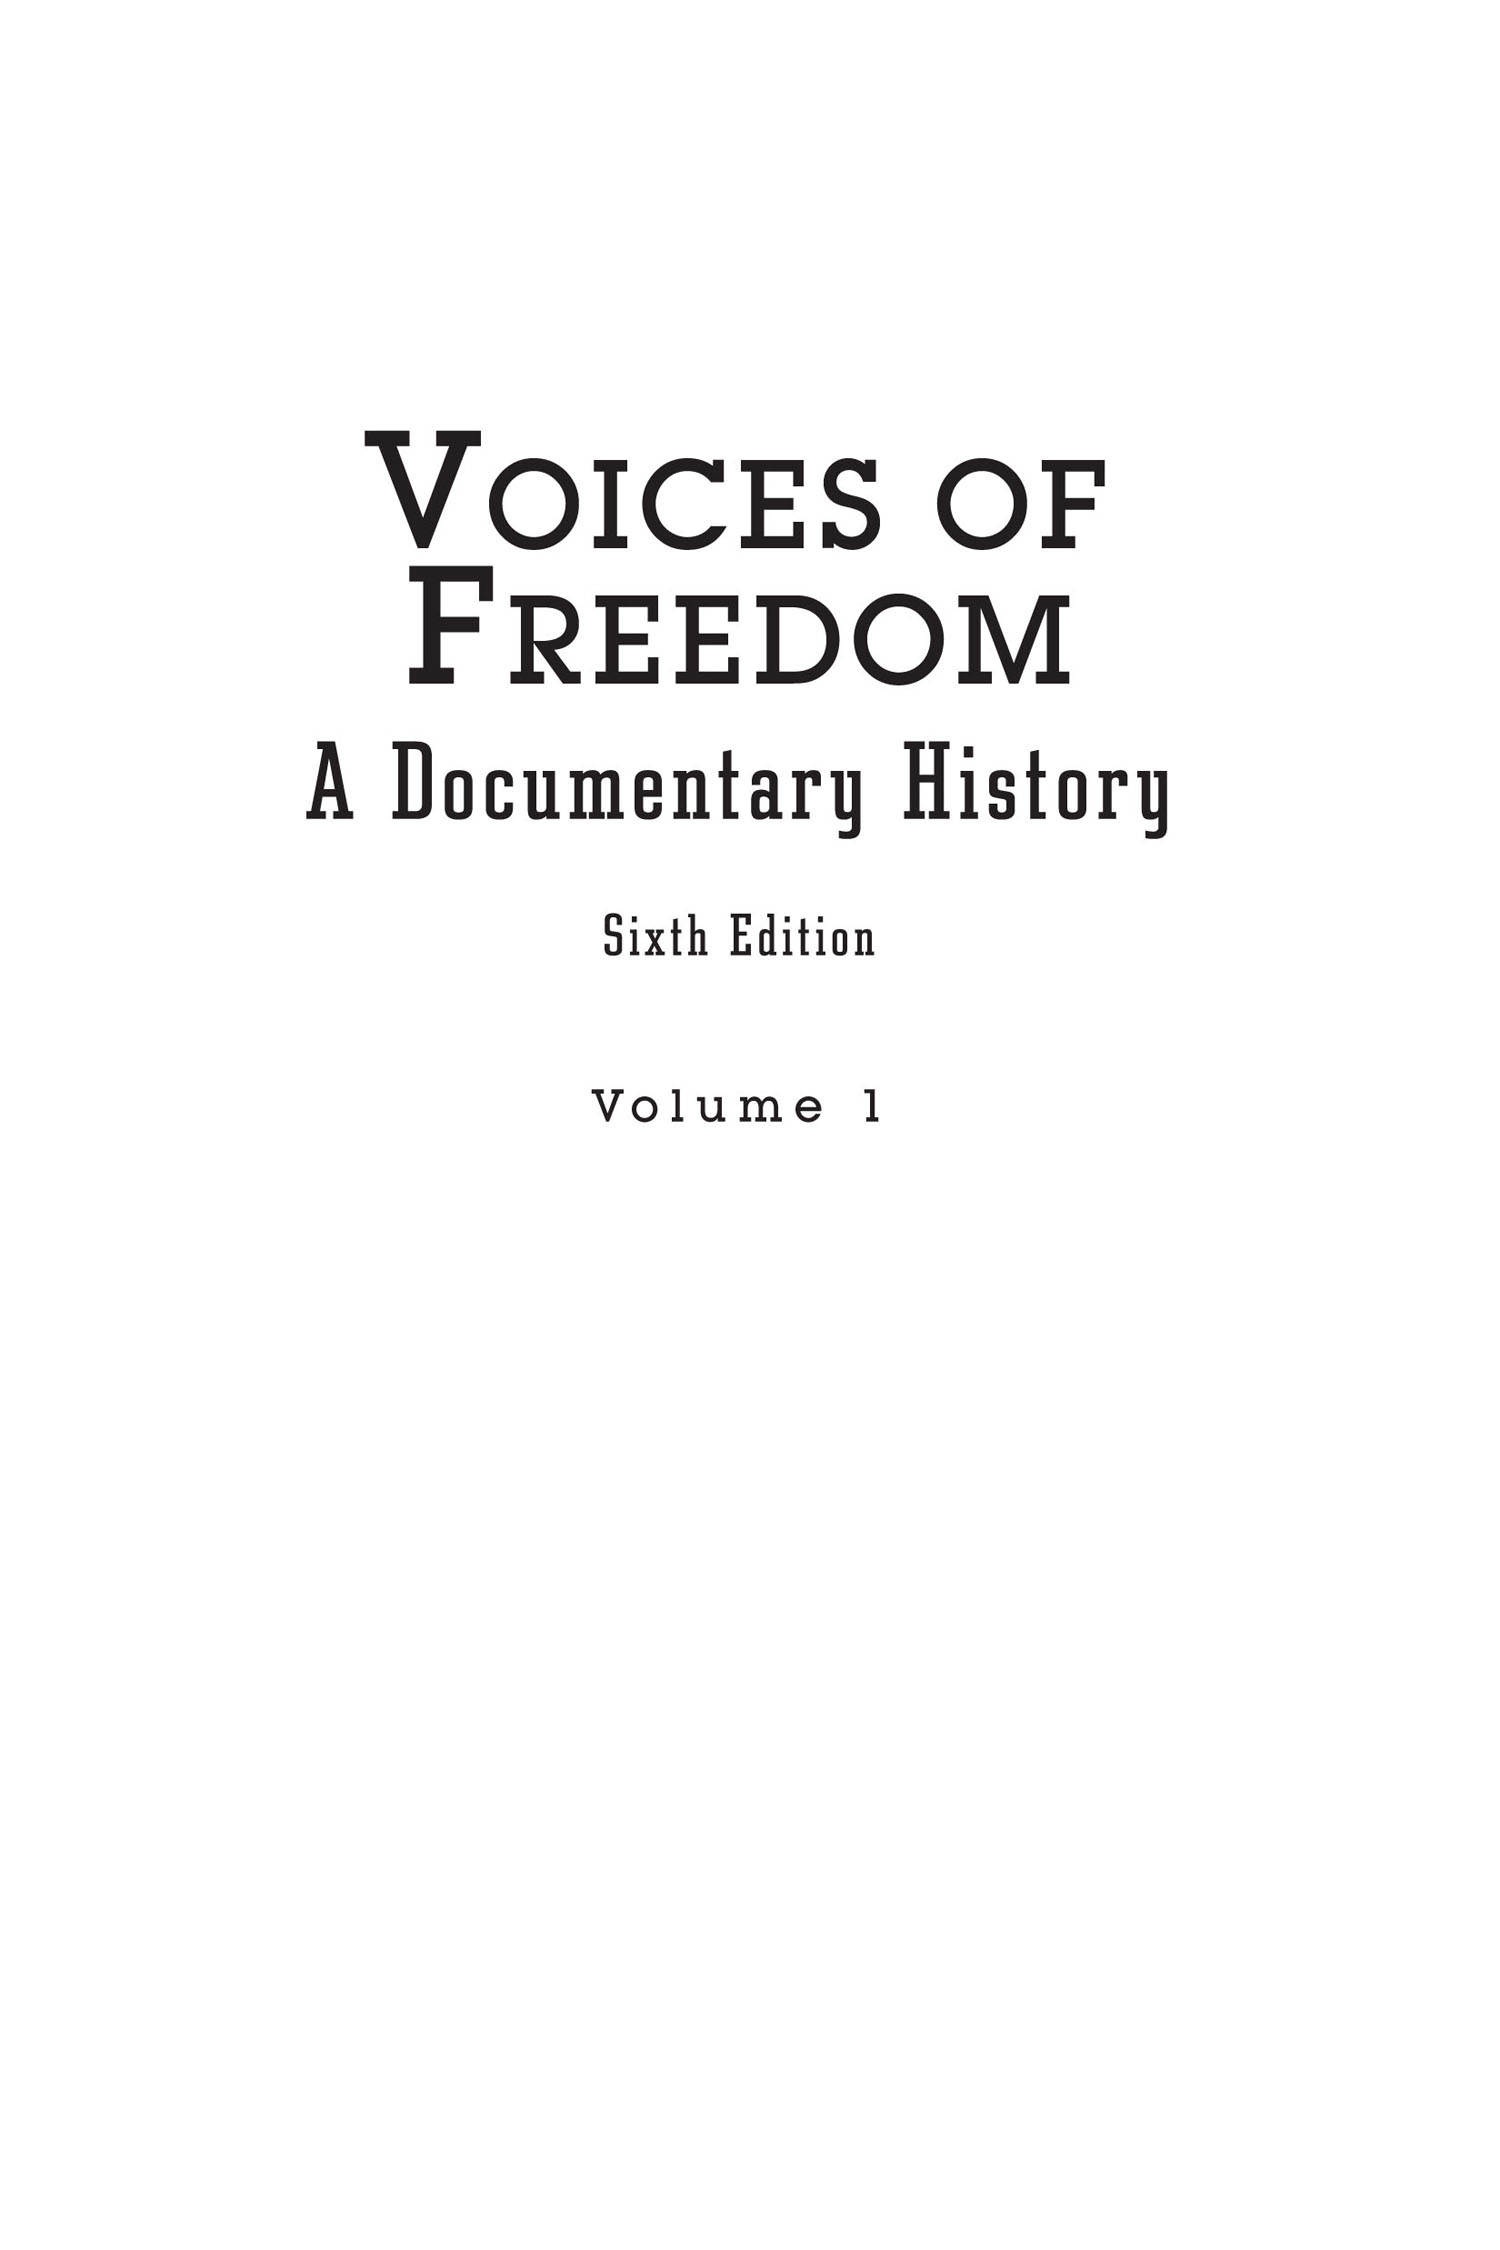 voices of freedom Volume 1 6th edition table of contents